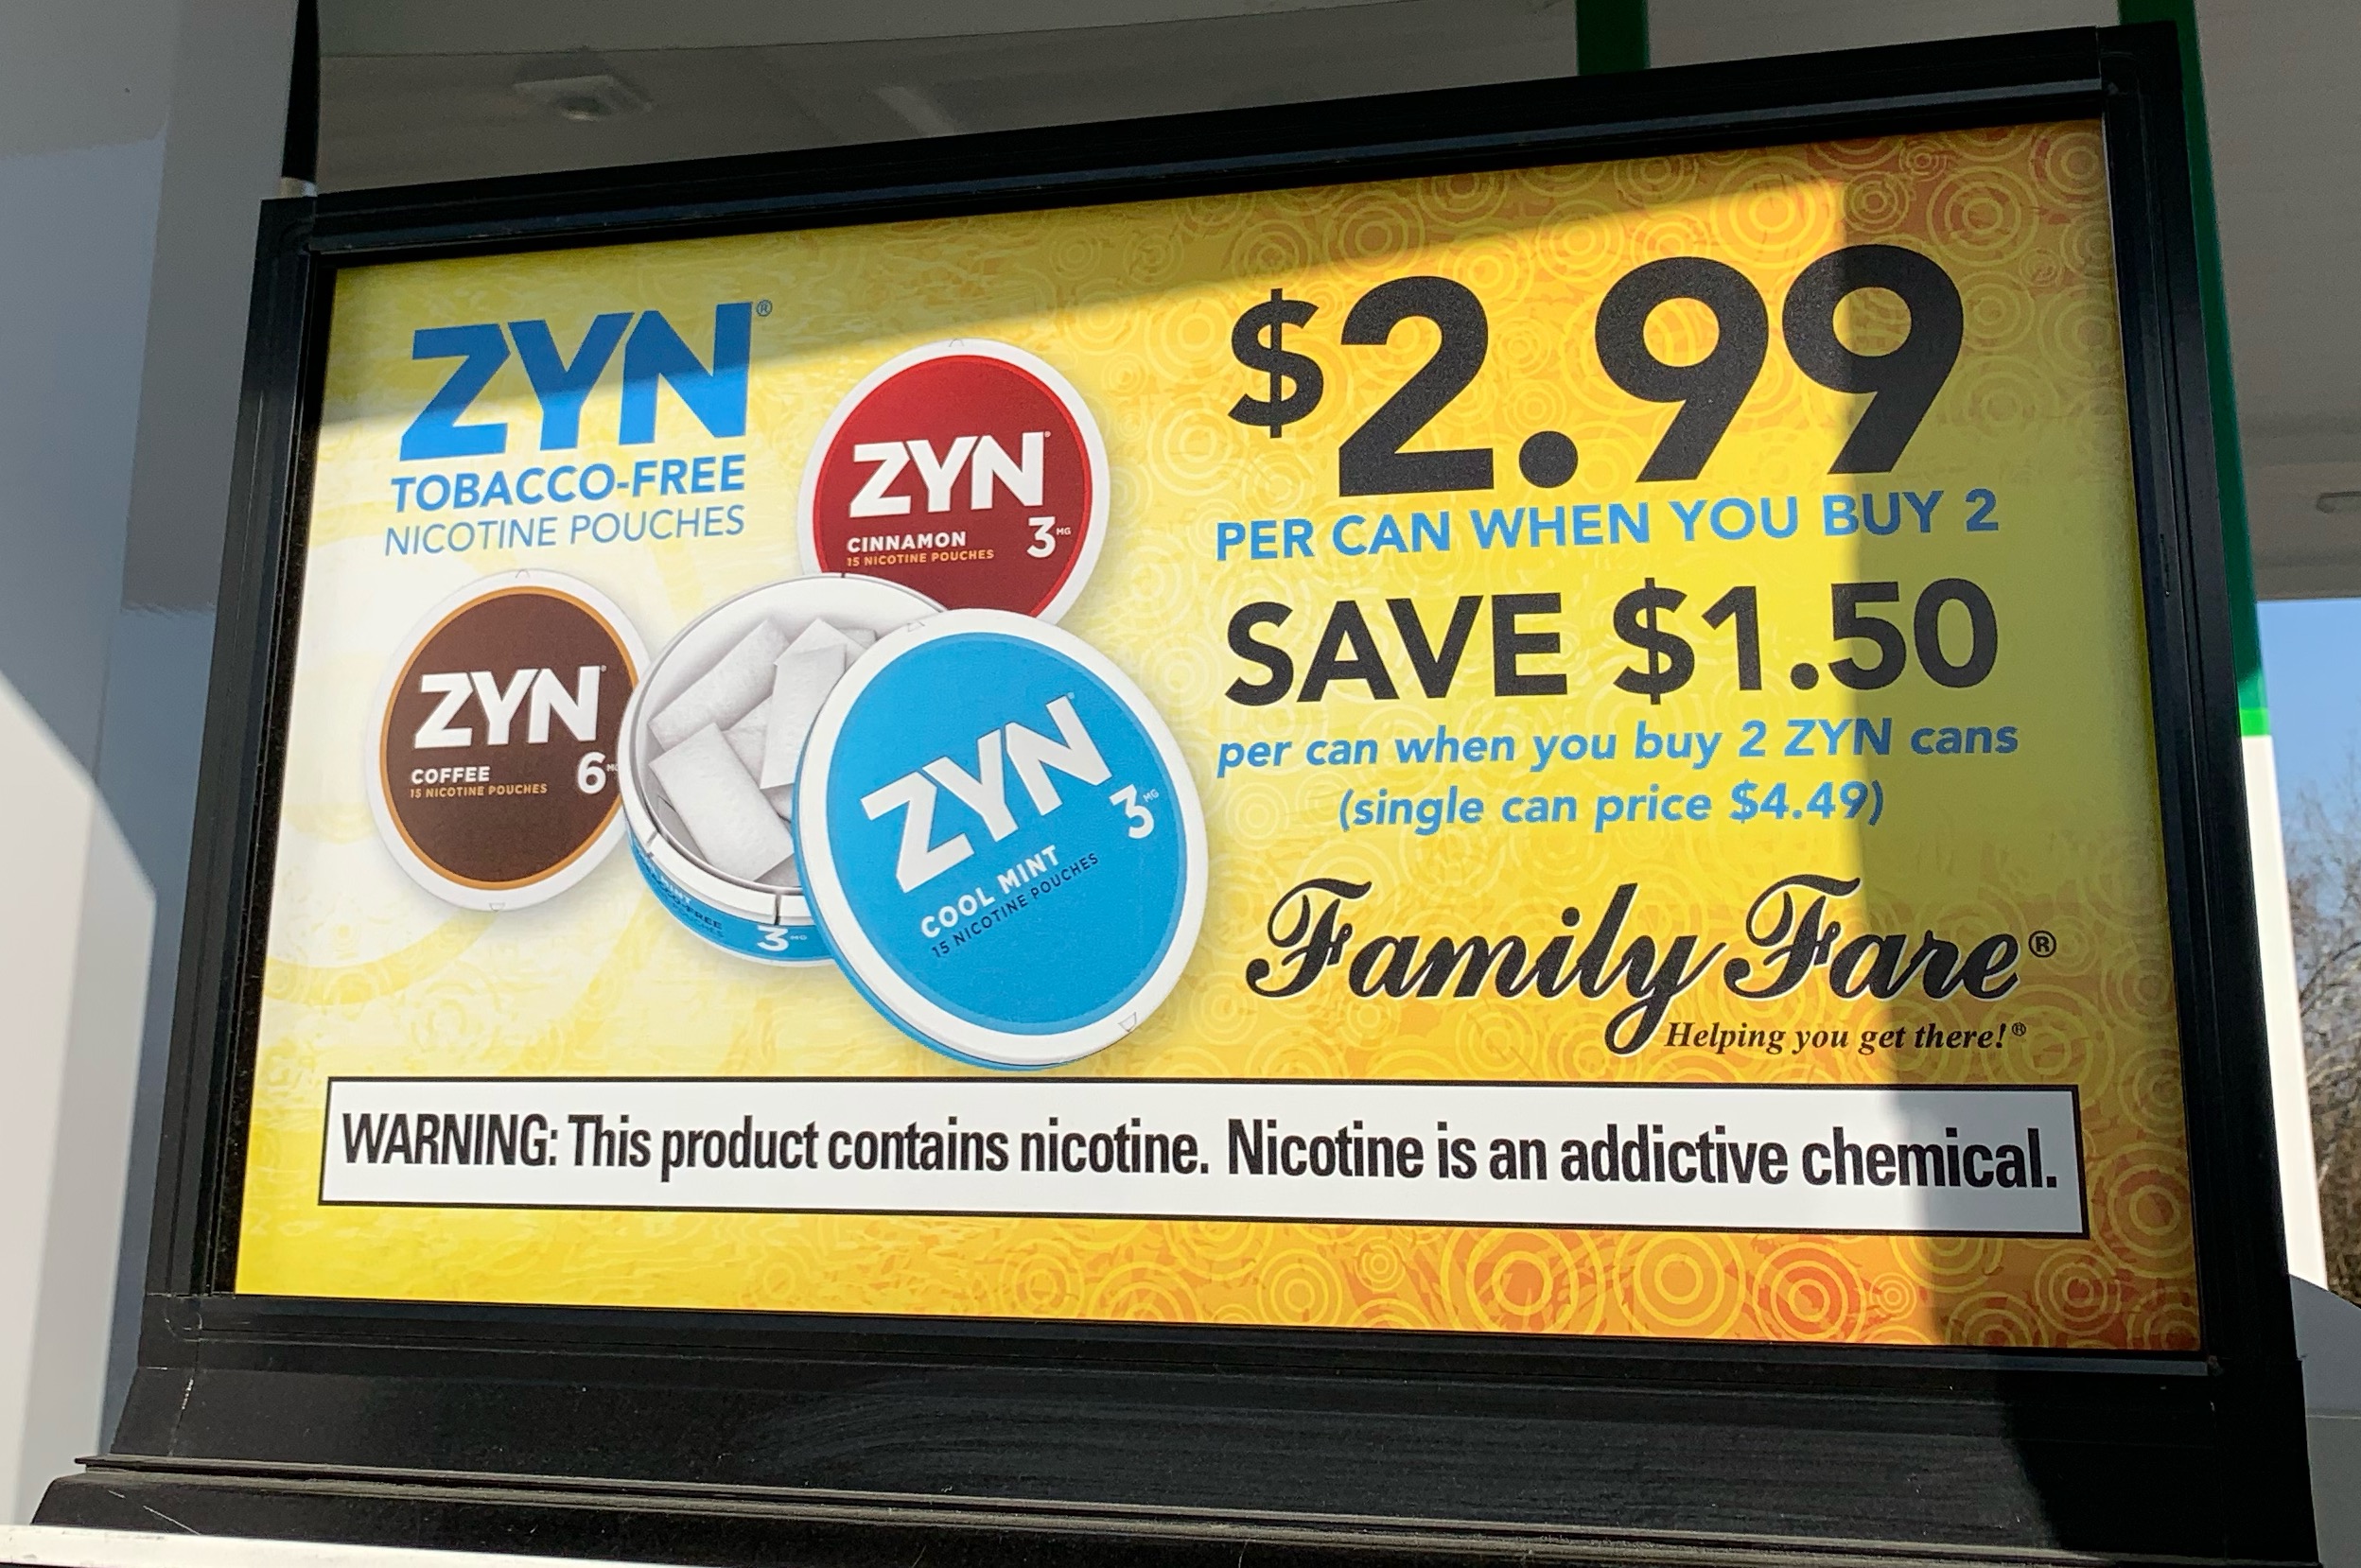 ad for Zyn nicotine pouches